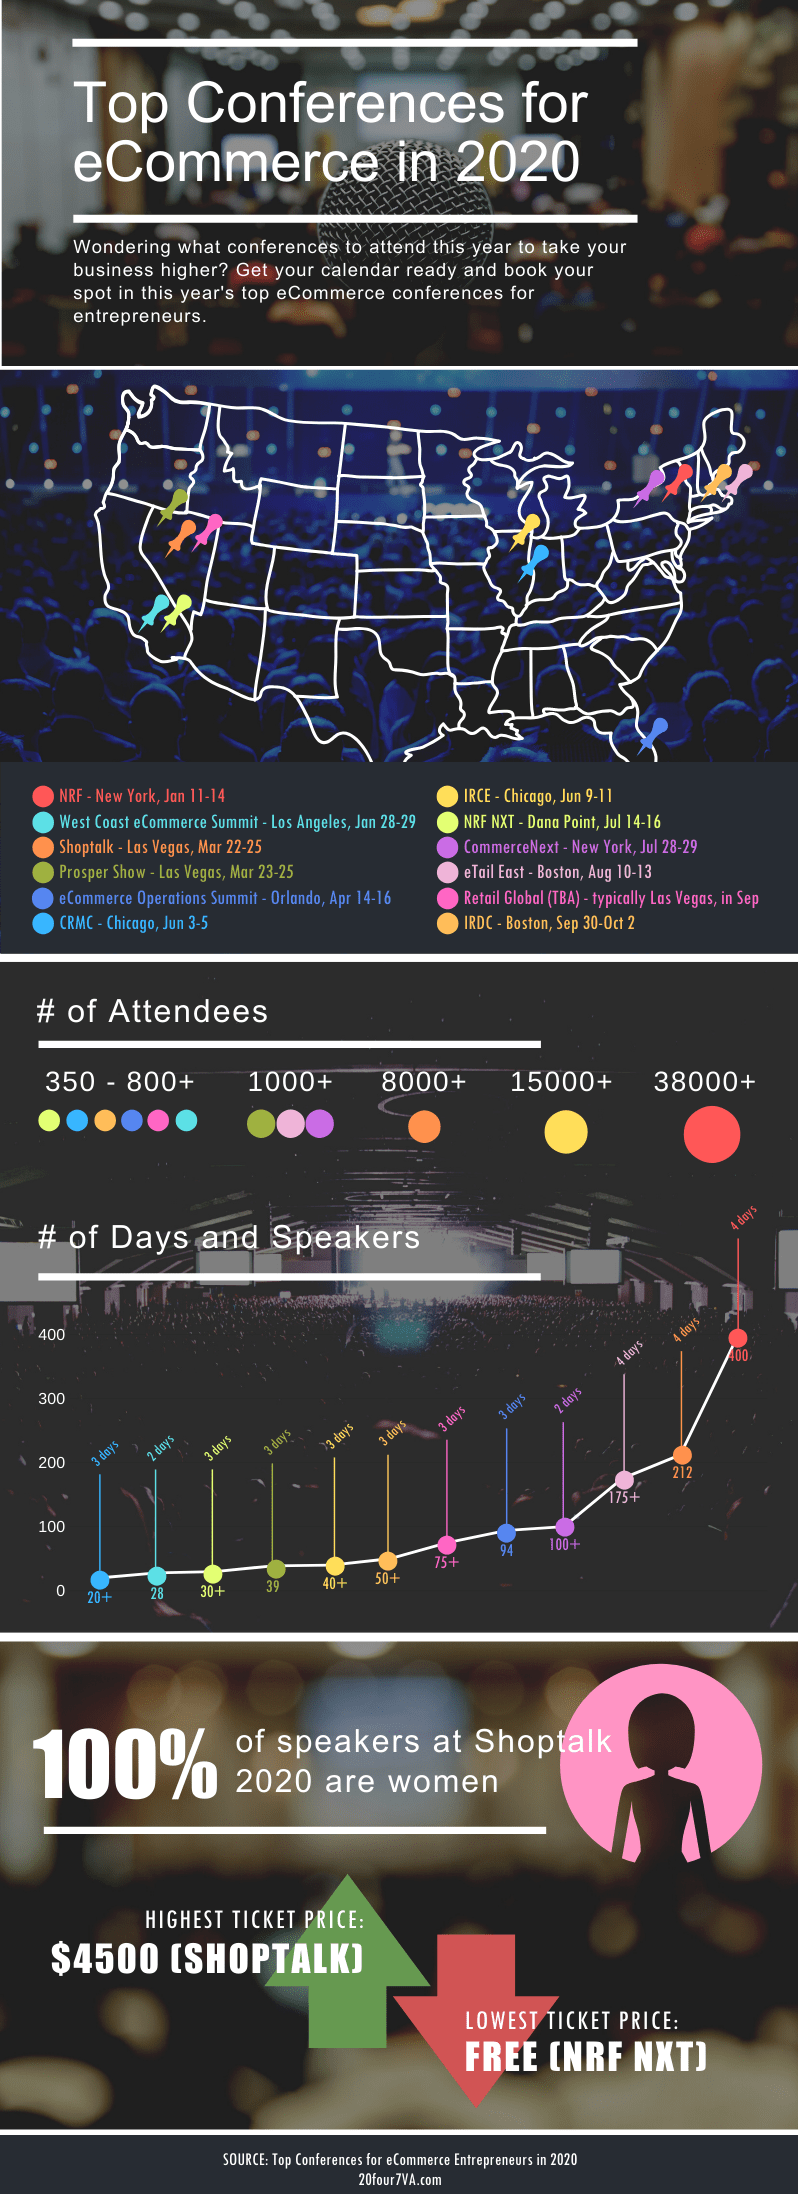 The Ultimate Guide To Conferences For Entrepreneurs 2020